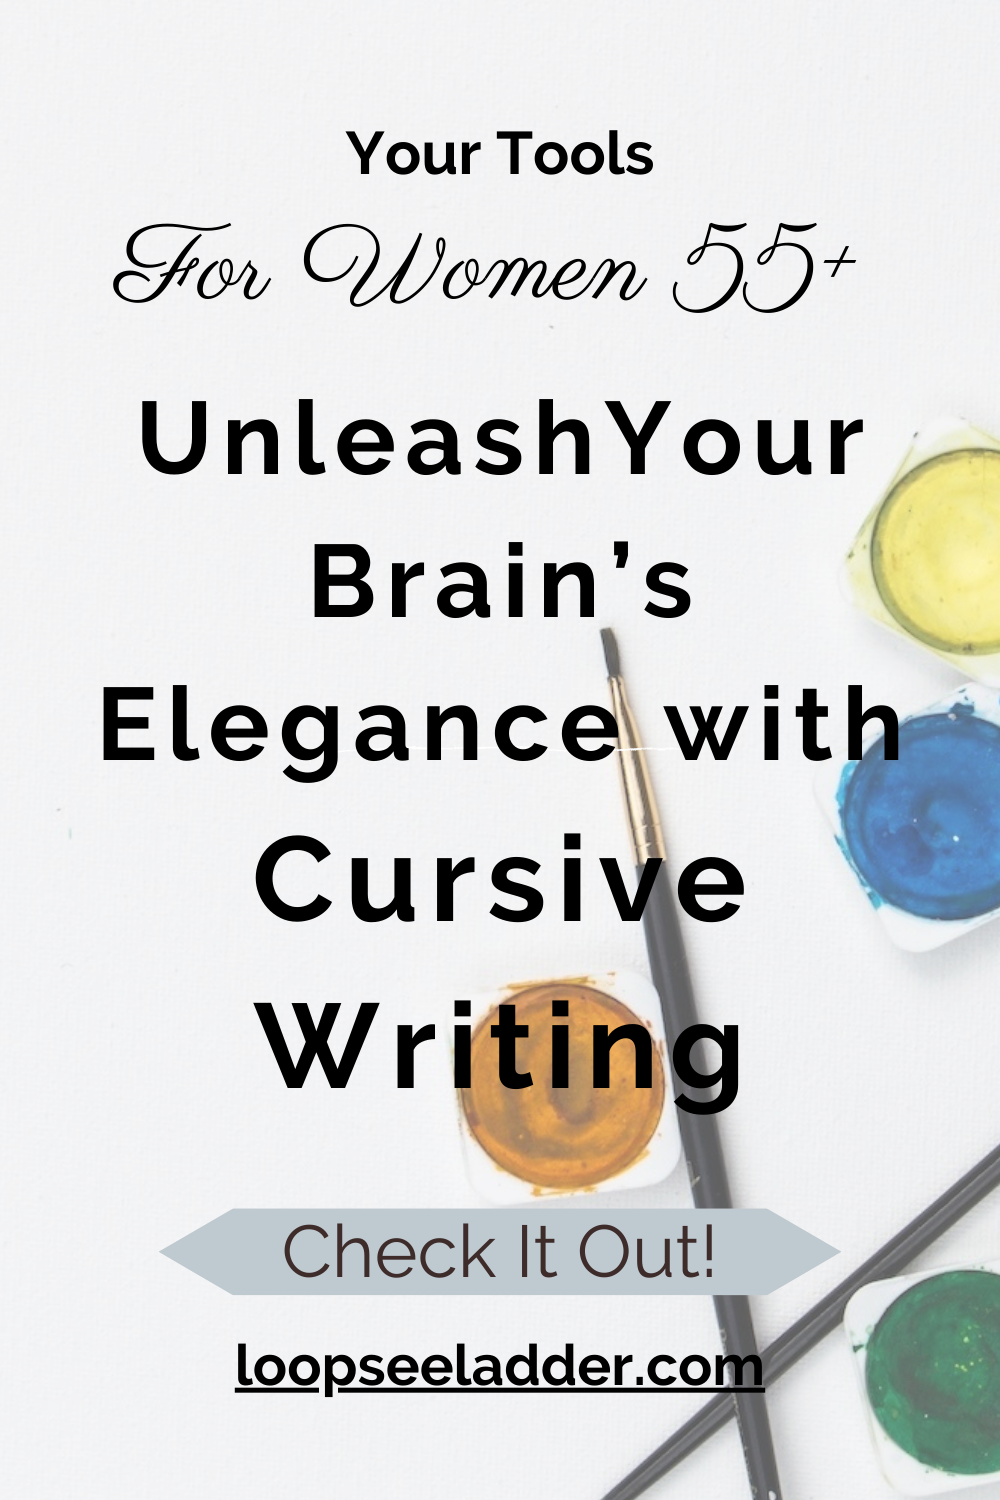 Unleash Your Brain's Elegance: The Remarkable Benefits of Cursive Writing for Women 55+